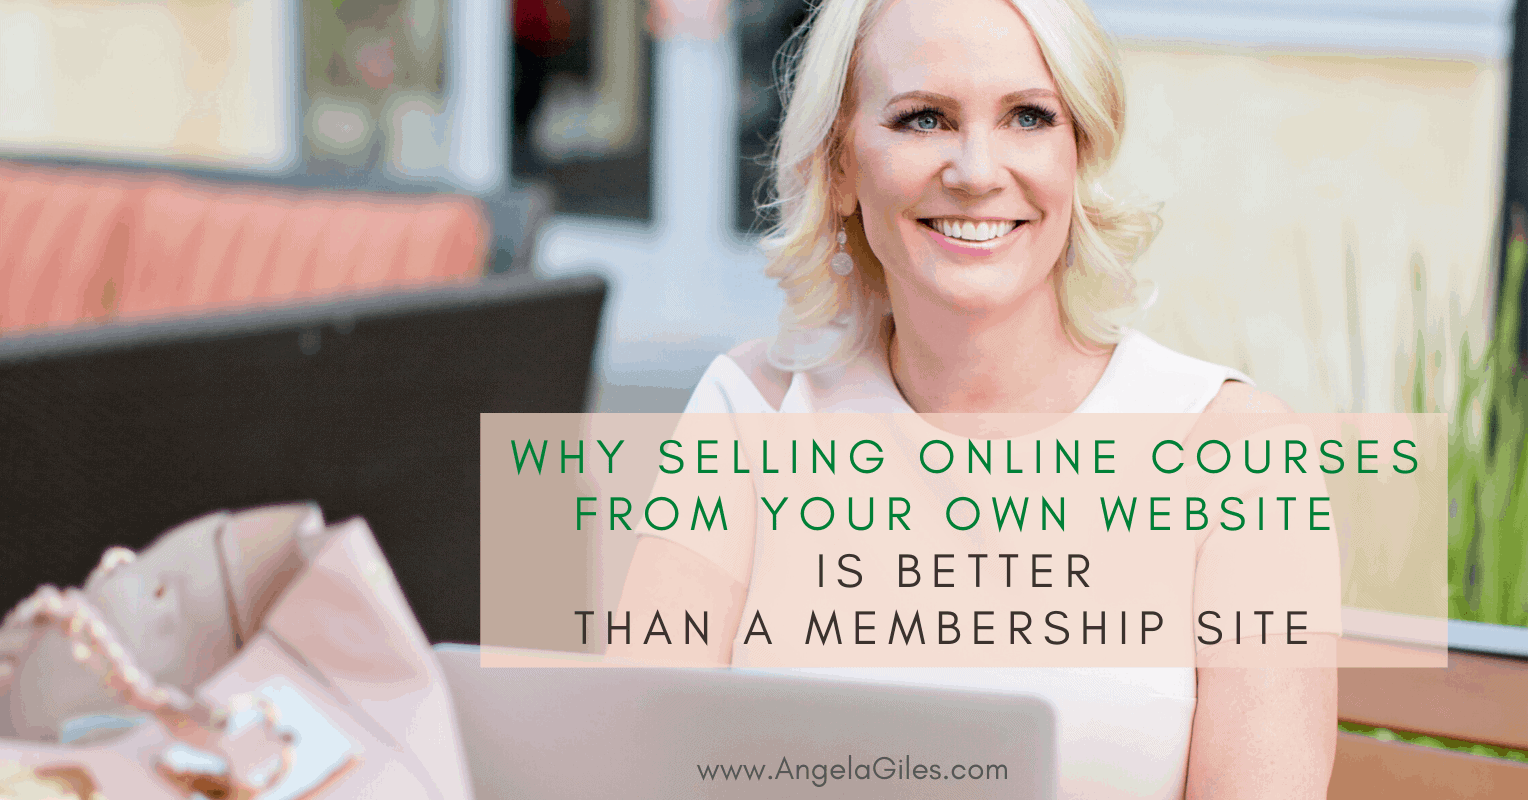 Selling Online Courses From Your Own Website Is More Lucrative Than A Membership Site.